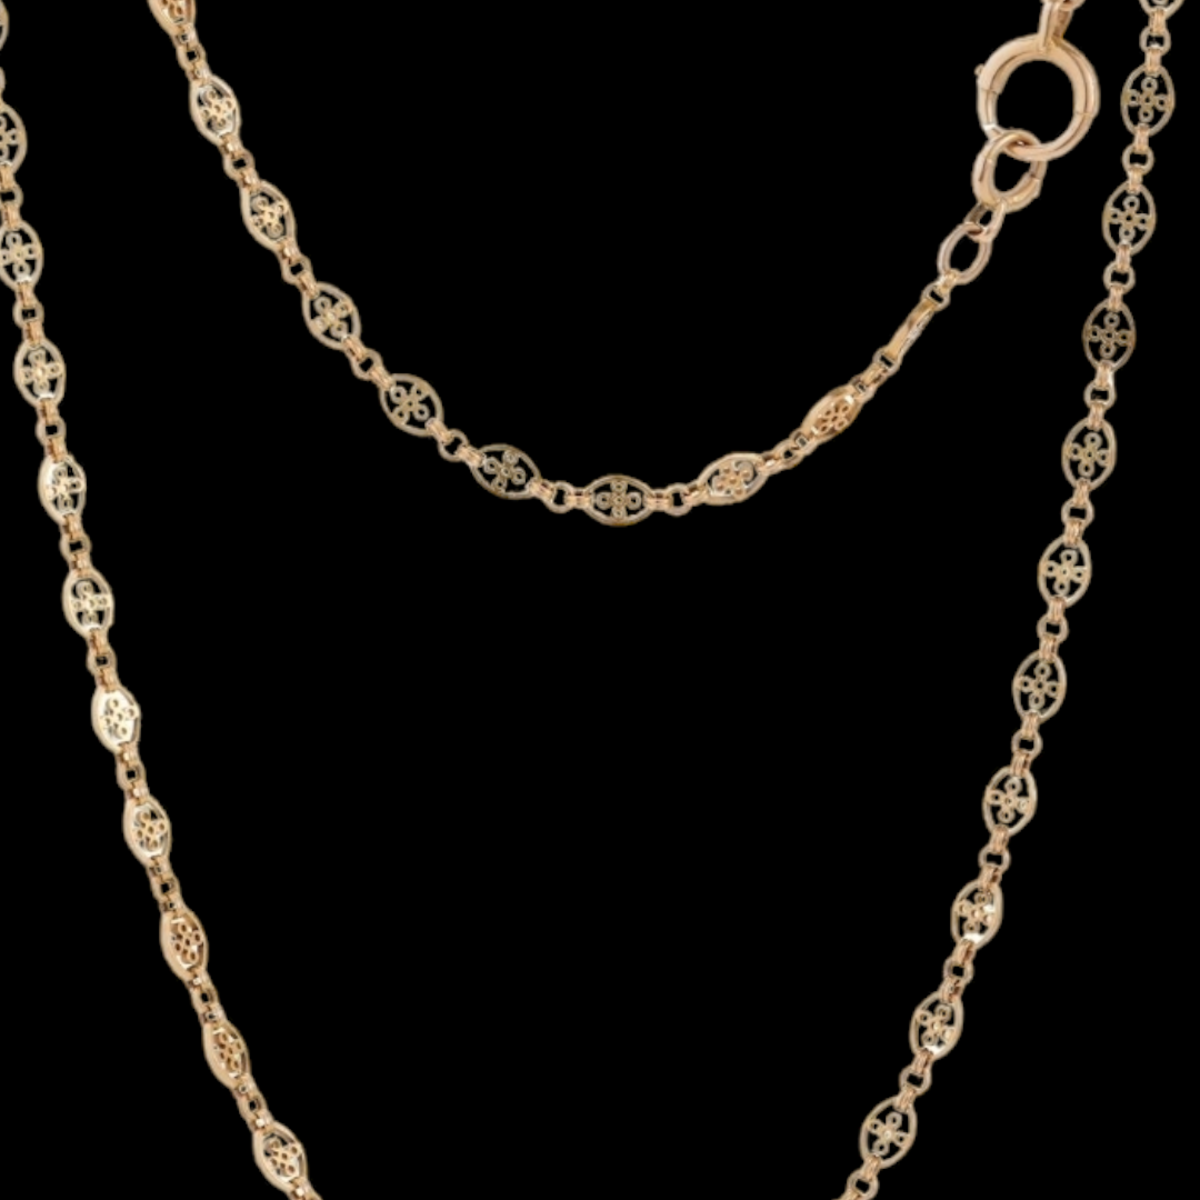 Antique 18KT Yellow Gold Long Chain Necklace close-up details on black background